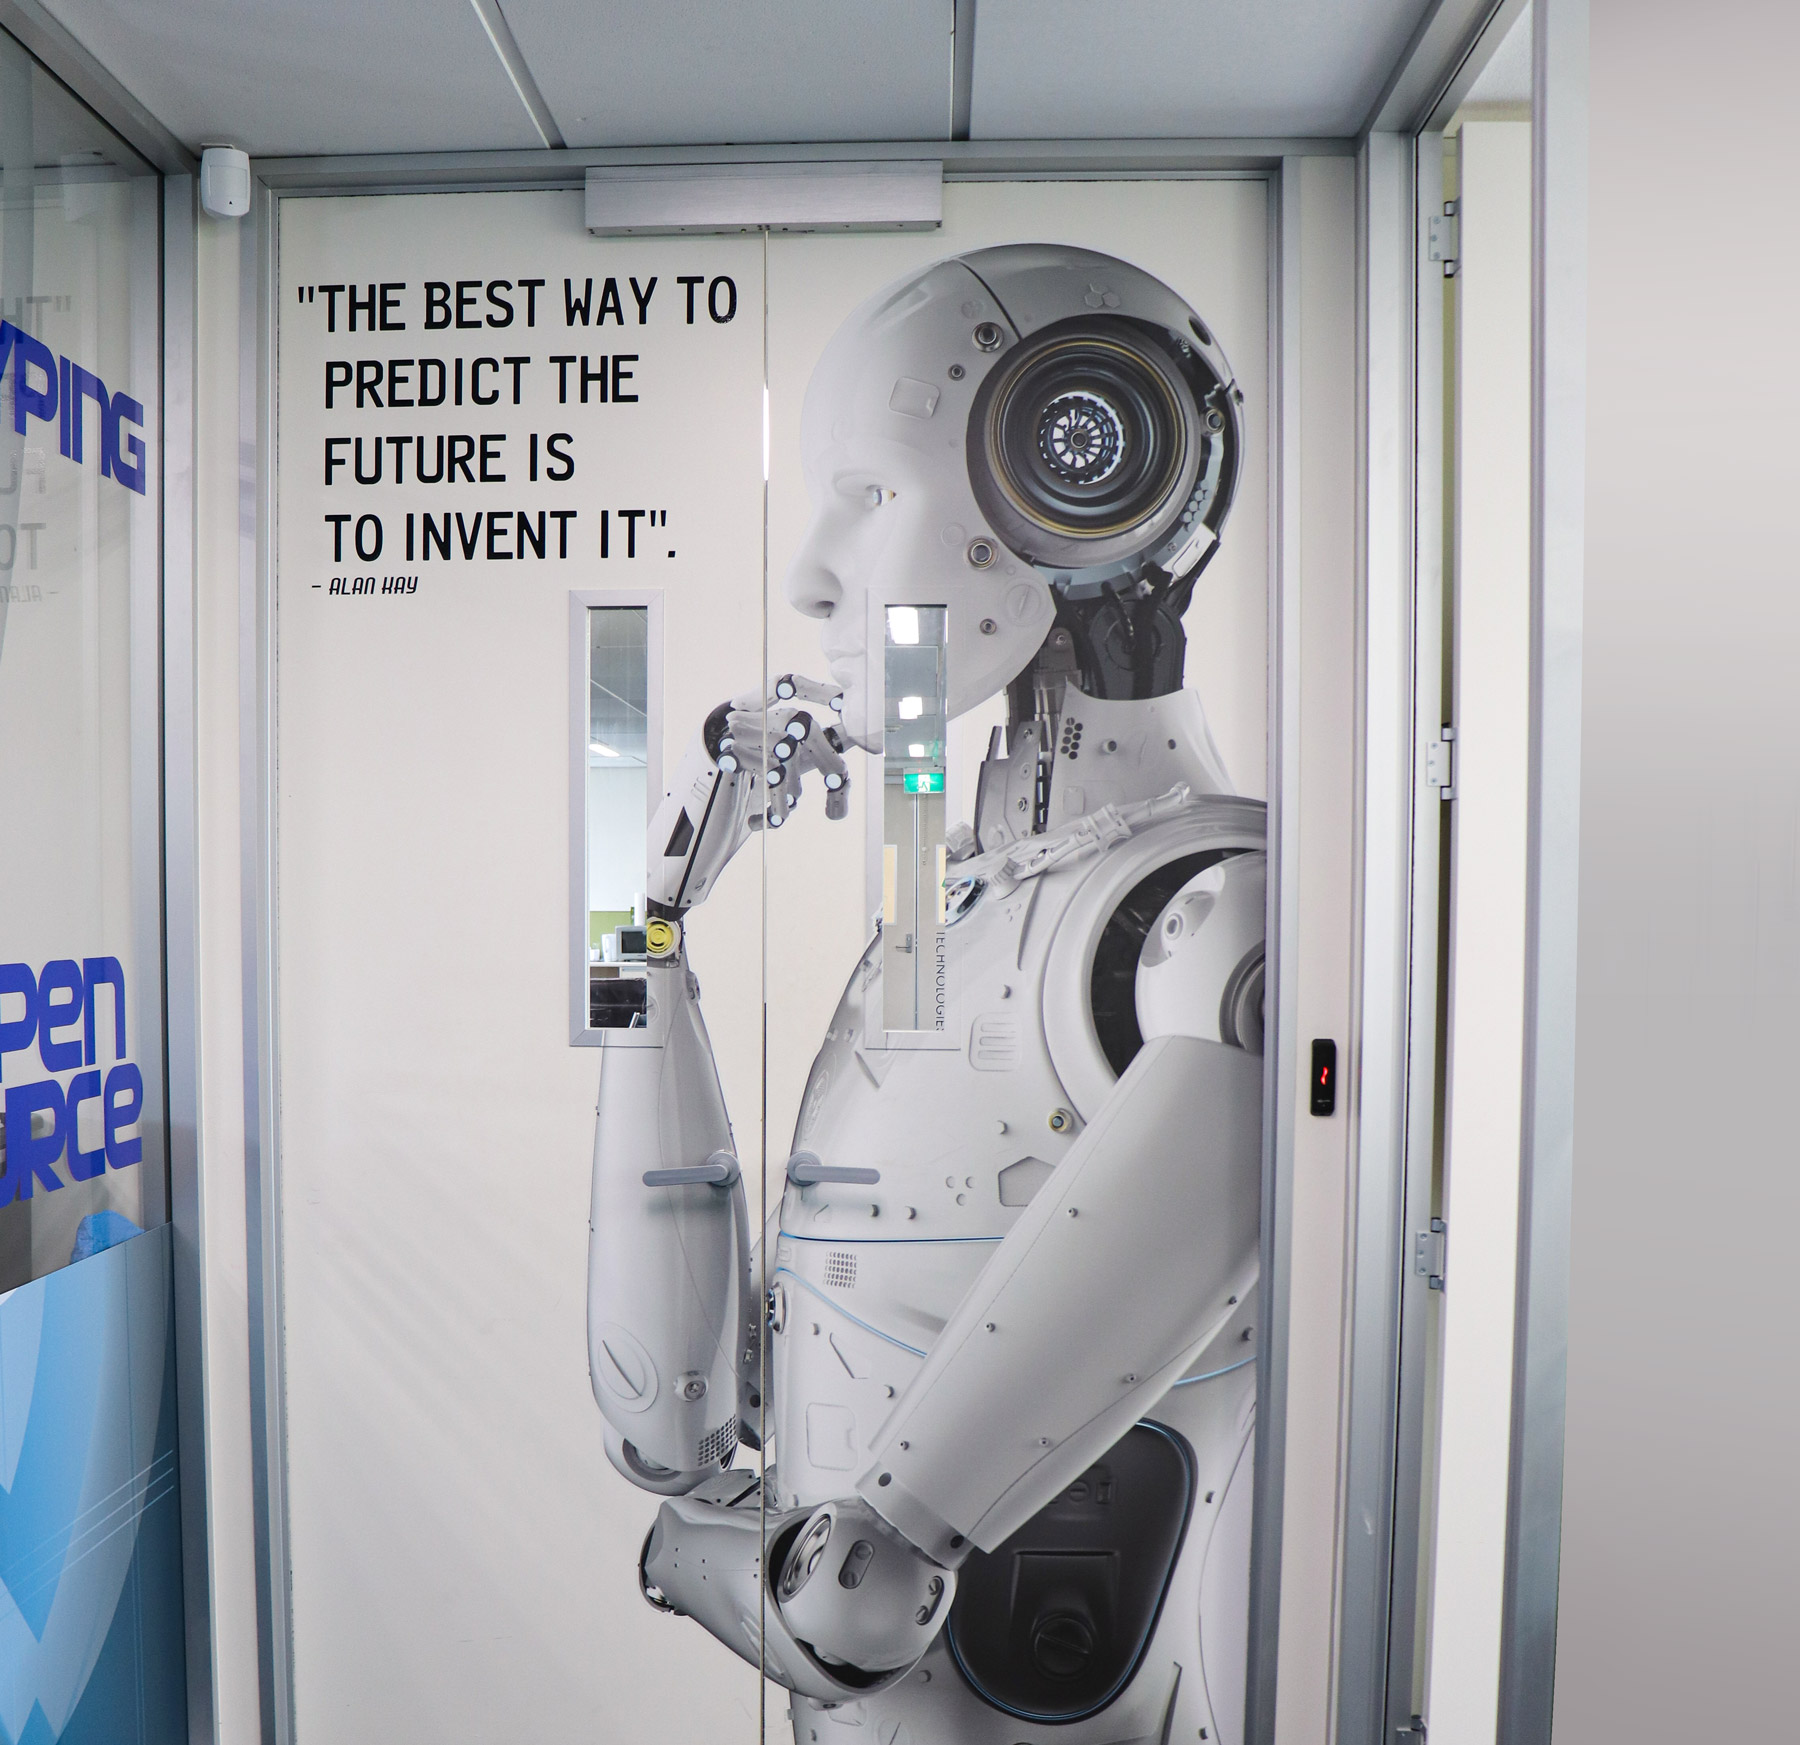 ASG Tech - "The best way to predict the future is to invent it". Door Artwork